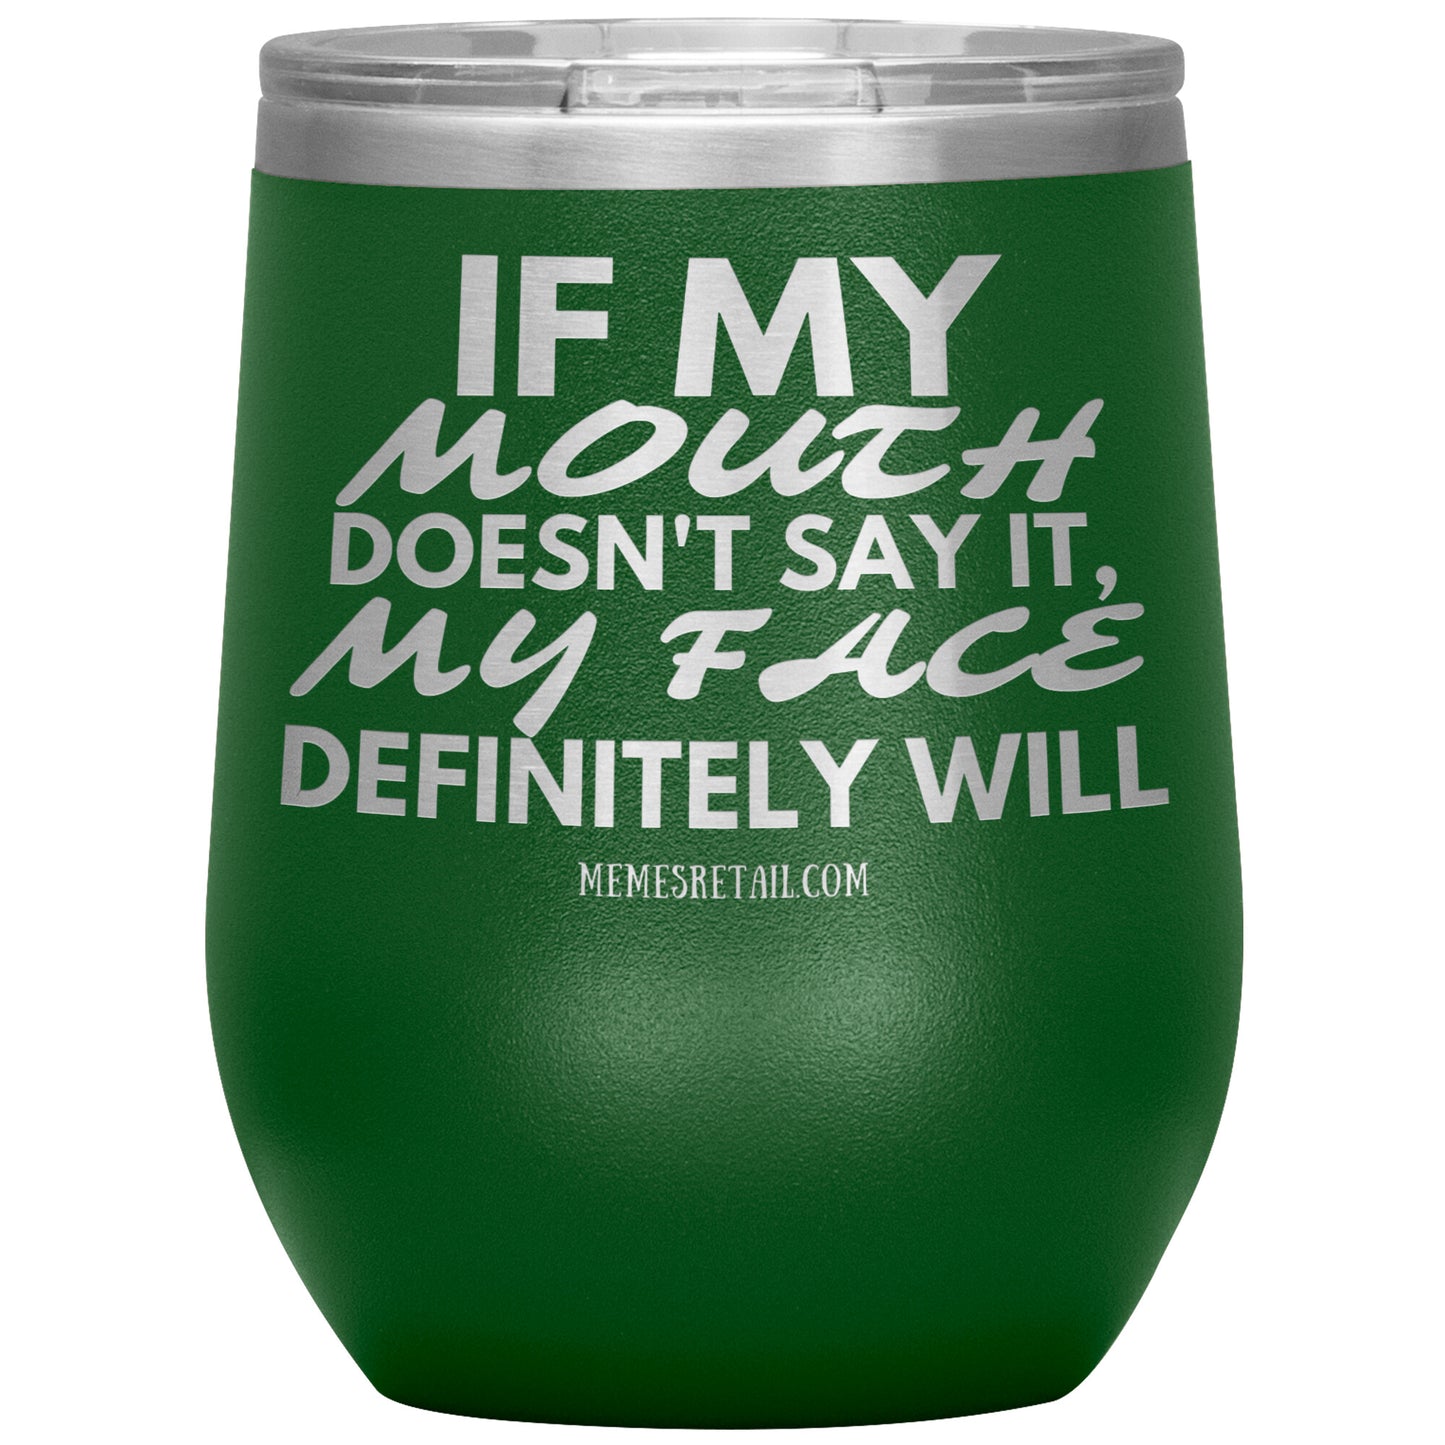 If my mouth doesn't say it, my face definitely will Tumblers, 12oz Wine Insulated Tumbler / Green - MemesRetail.com